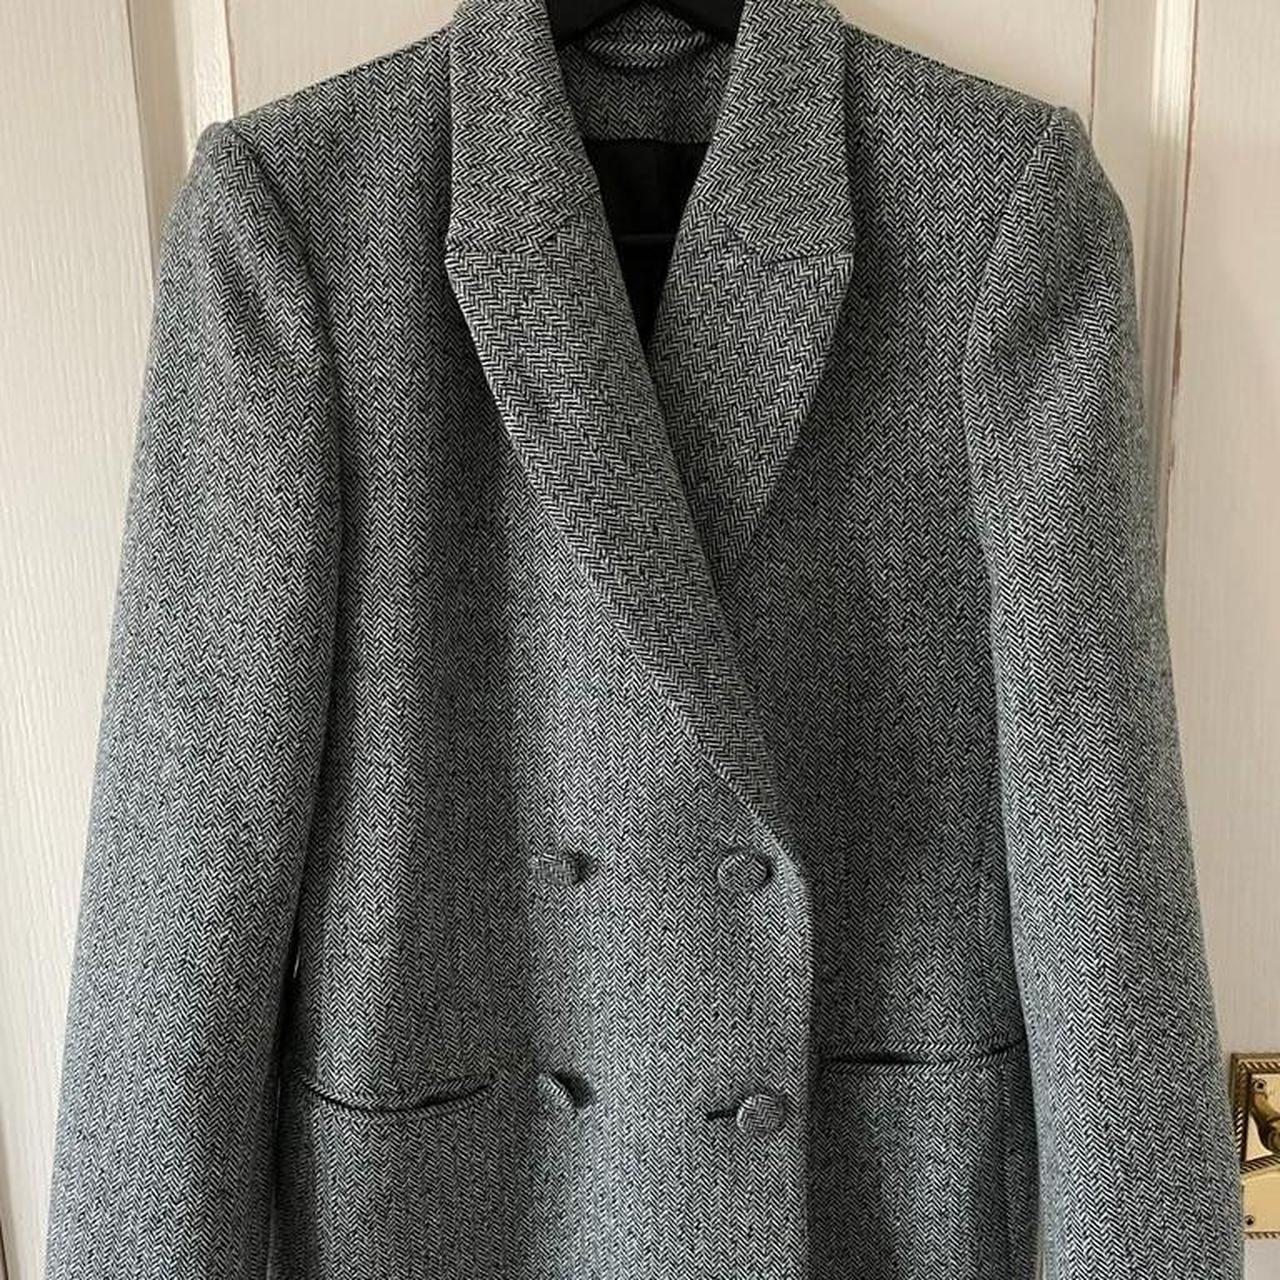 Andotherstories checked blazer. Brand new without... - Depop